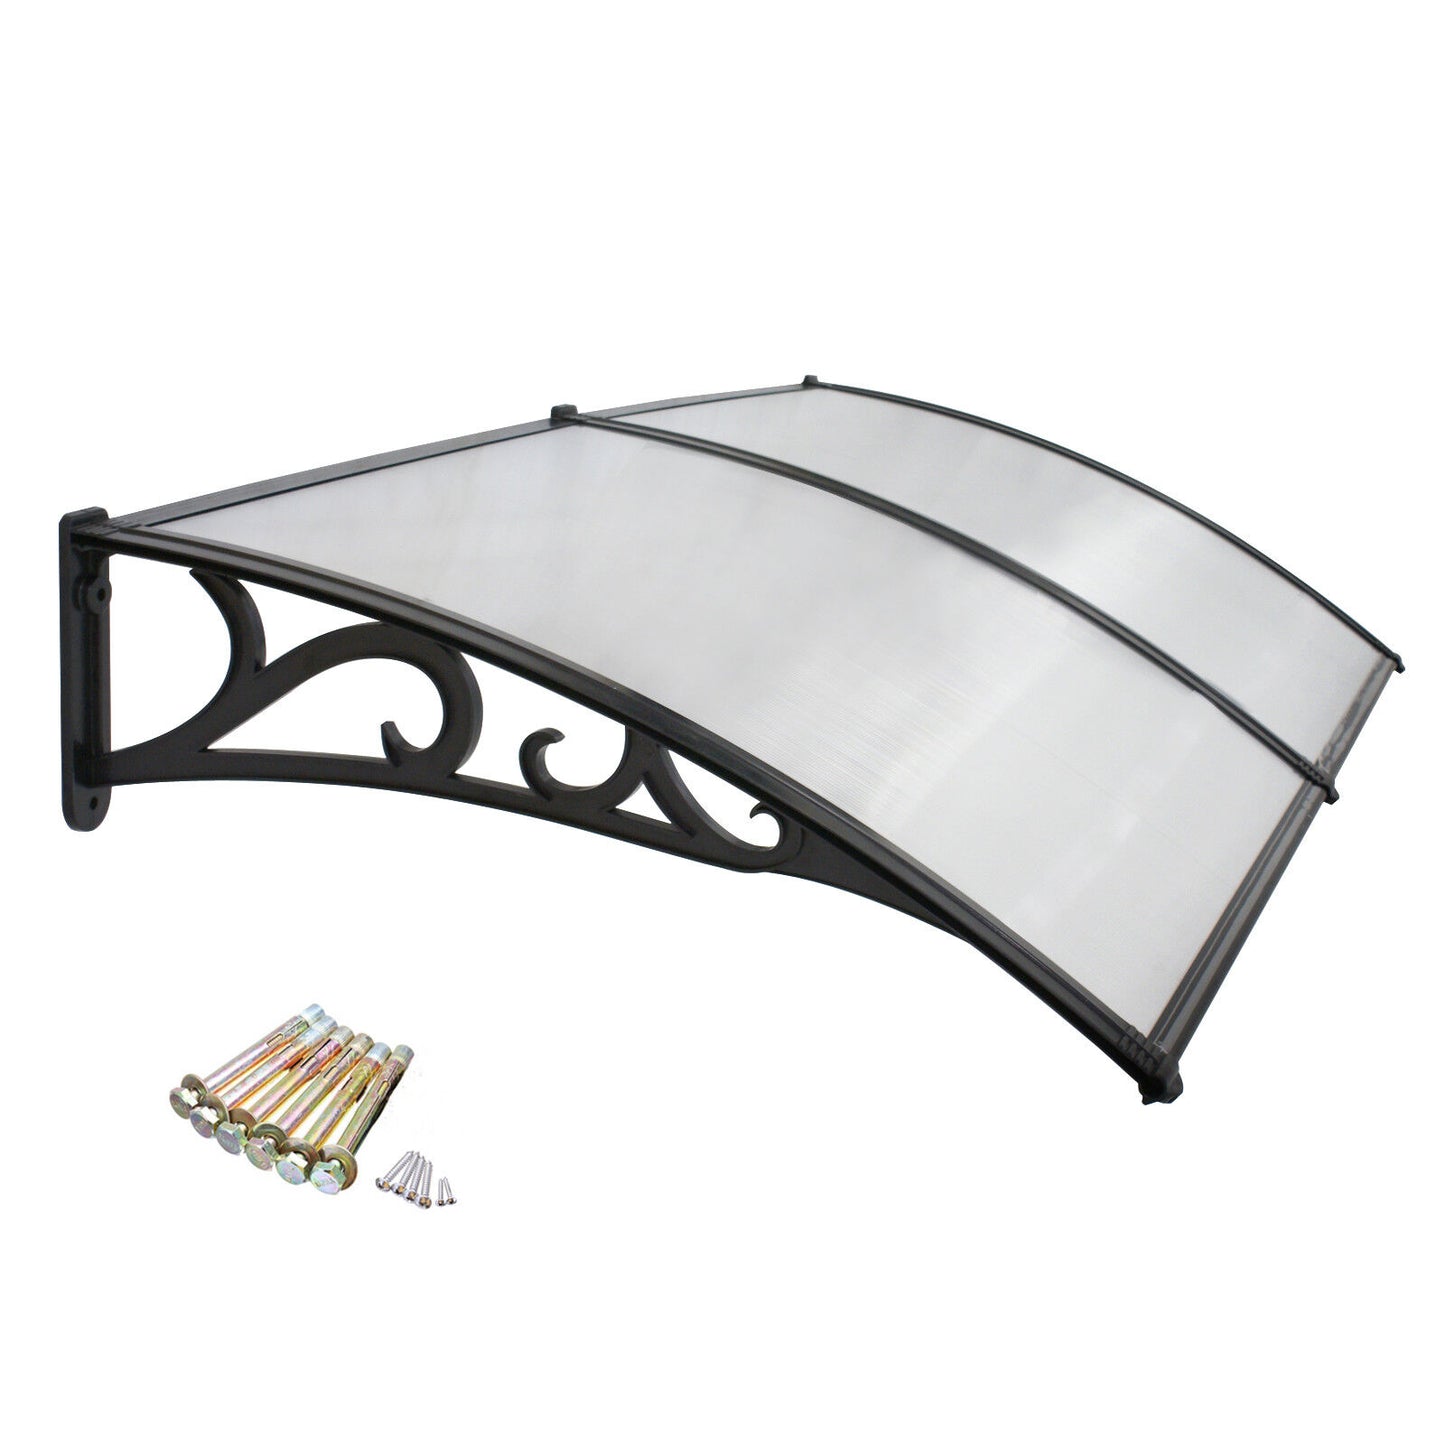 80" x 40" Window Canopy Awning Door Complete Polycarbonate Sheet Patio Outdoor